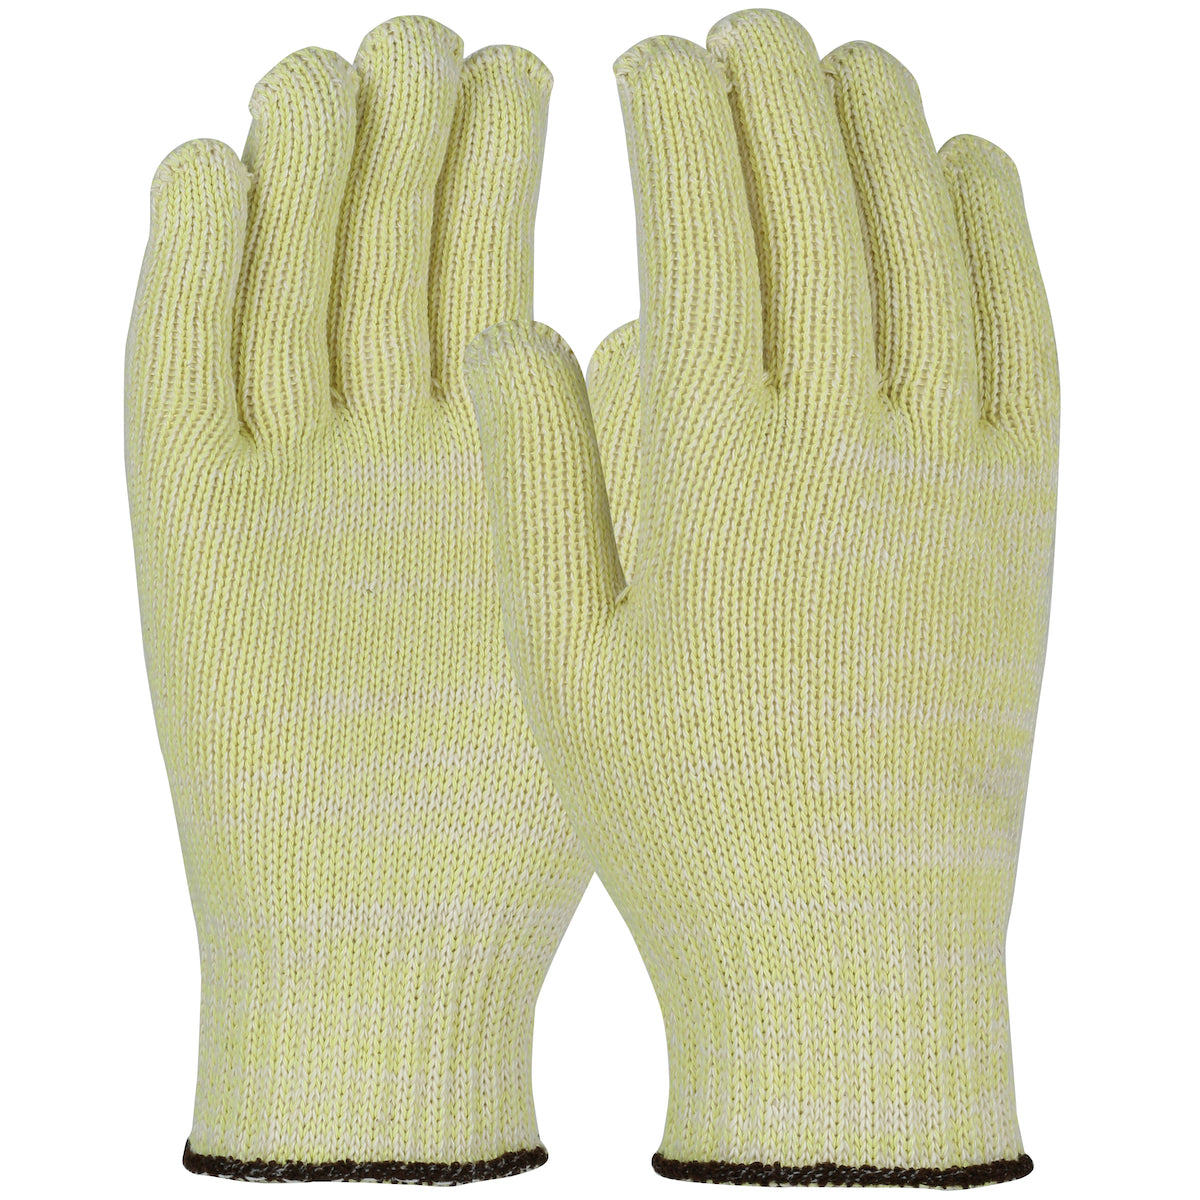 WPP MTW37PL-M Seamless Knit Aramid with Cotton Plating Glove - Heavy Weight